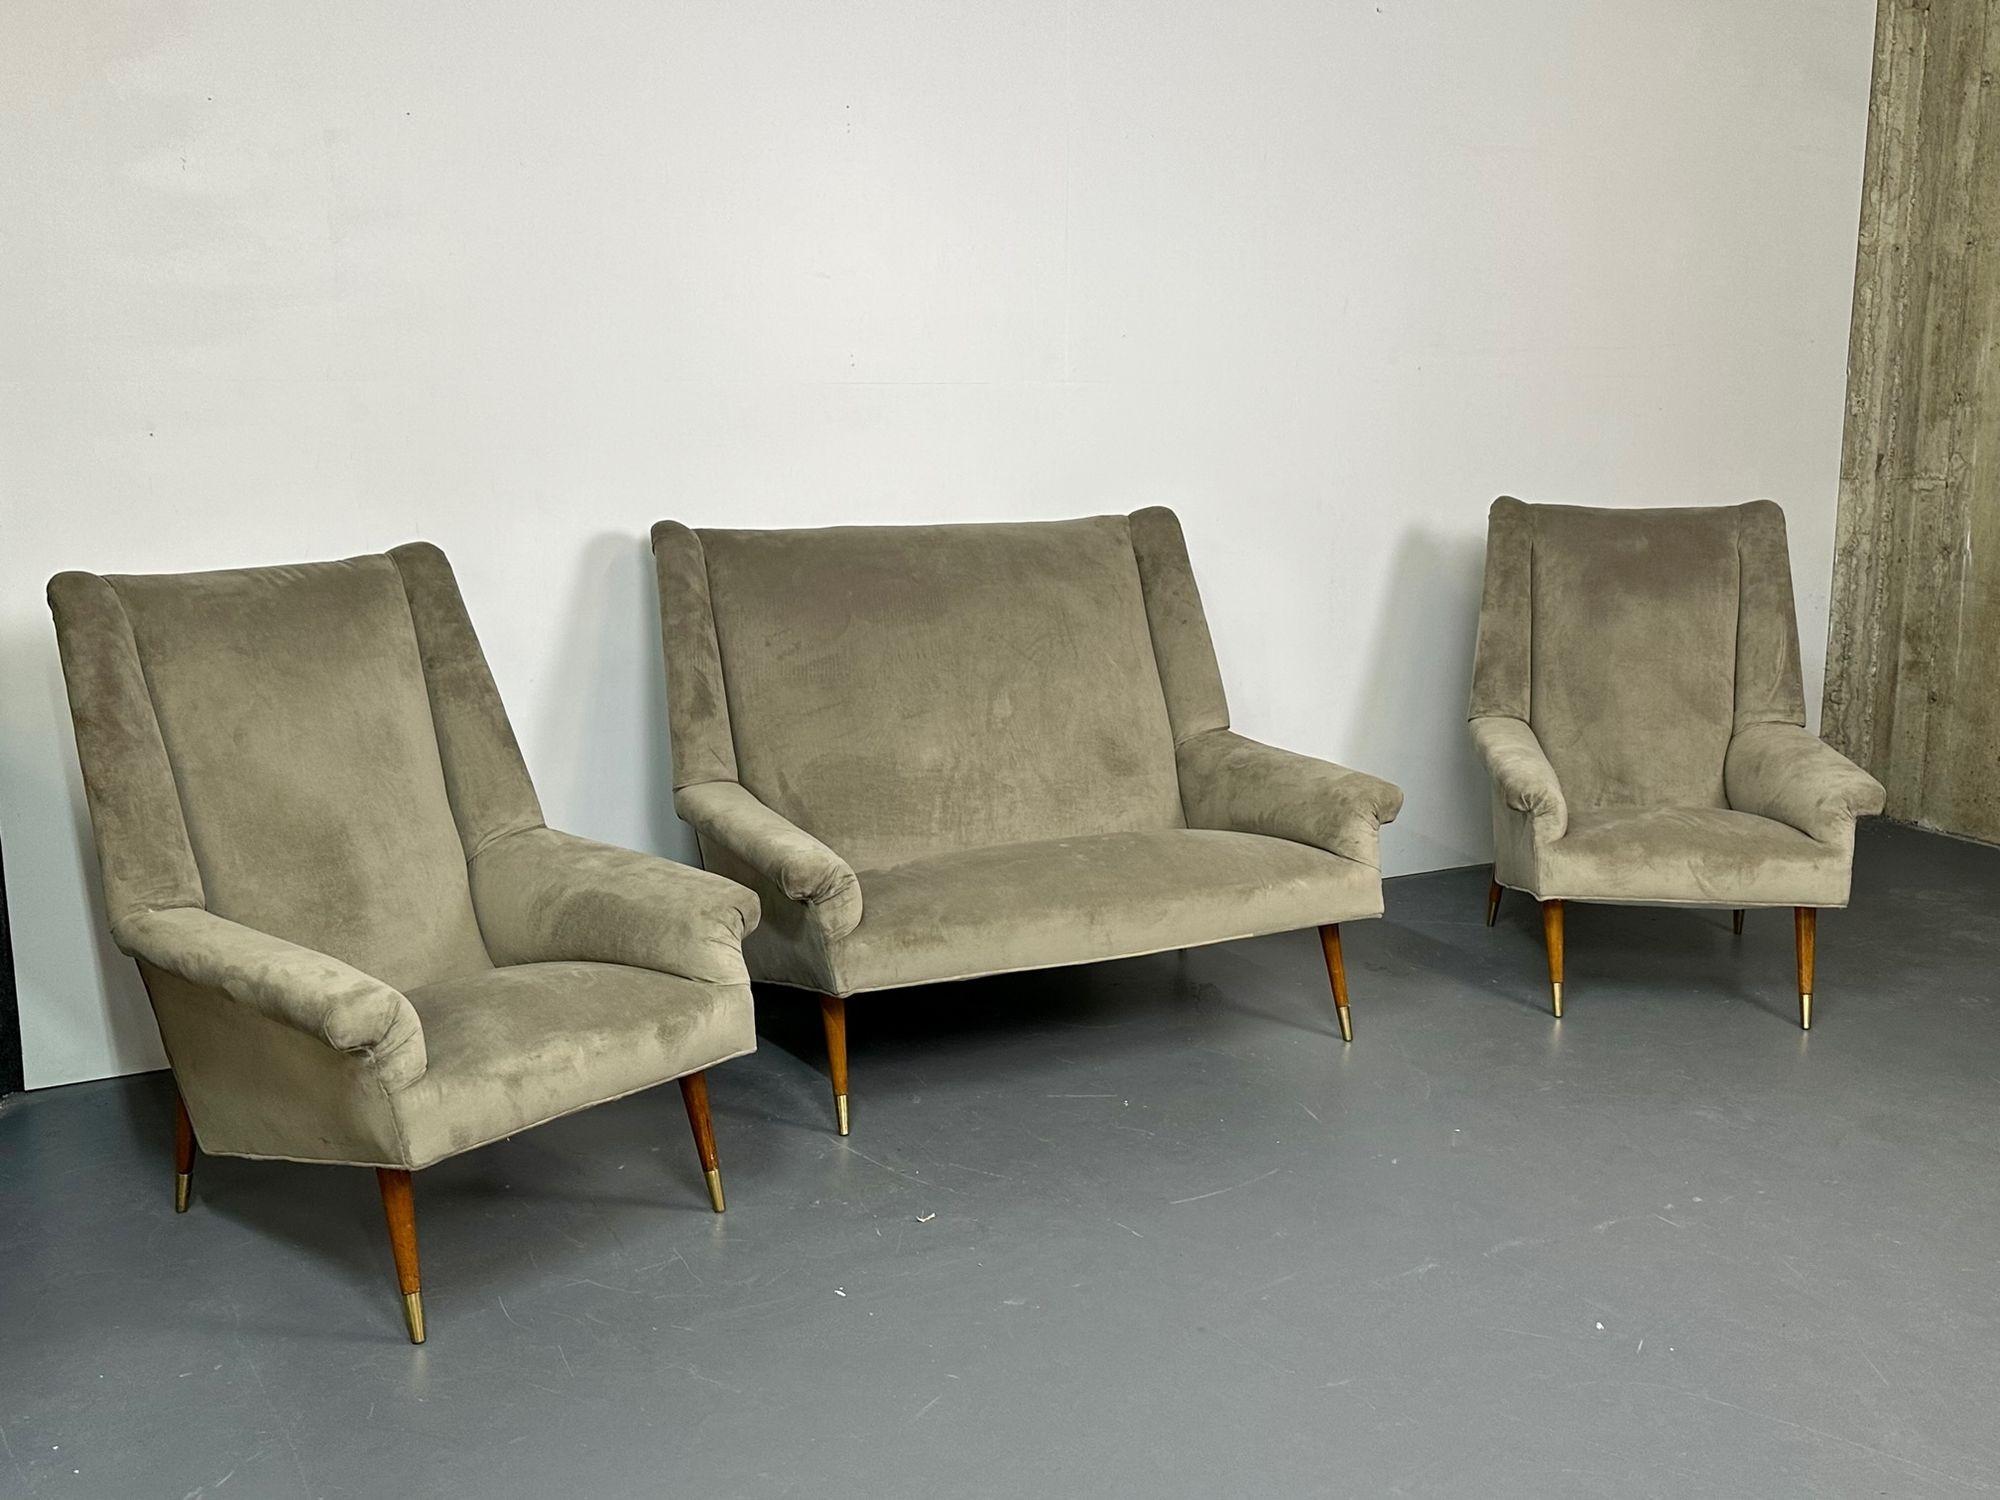 Italian Mid-Century Modern Gio Ponti Style sofa / Lounge chairs, Velvet, Walnut, Unsigned

Chic Italian sofa set of the mid-century period. This set includes a two-seater sofa/settee as well as two matching lounge/arm chairs. Each piece having